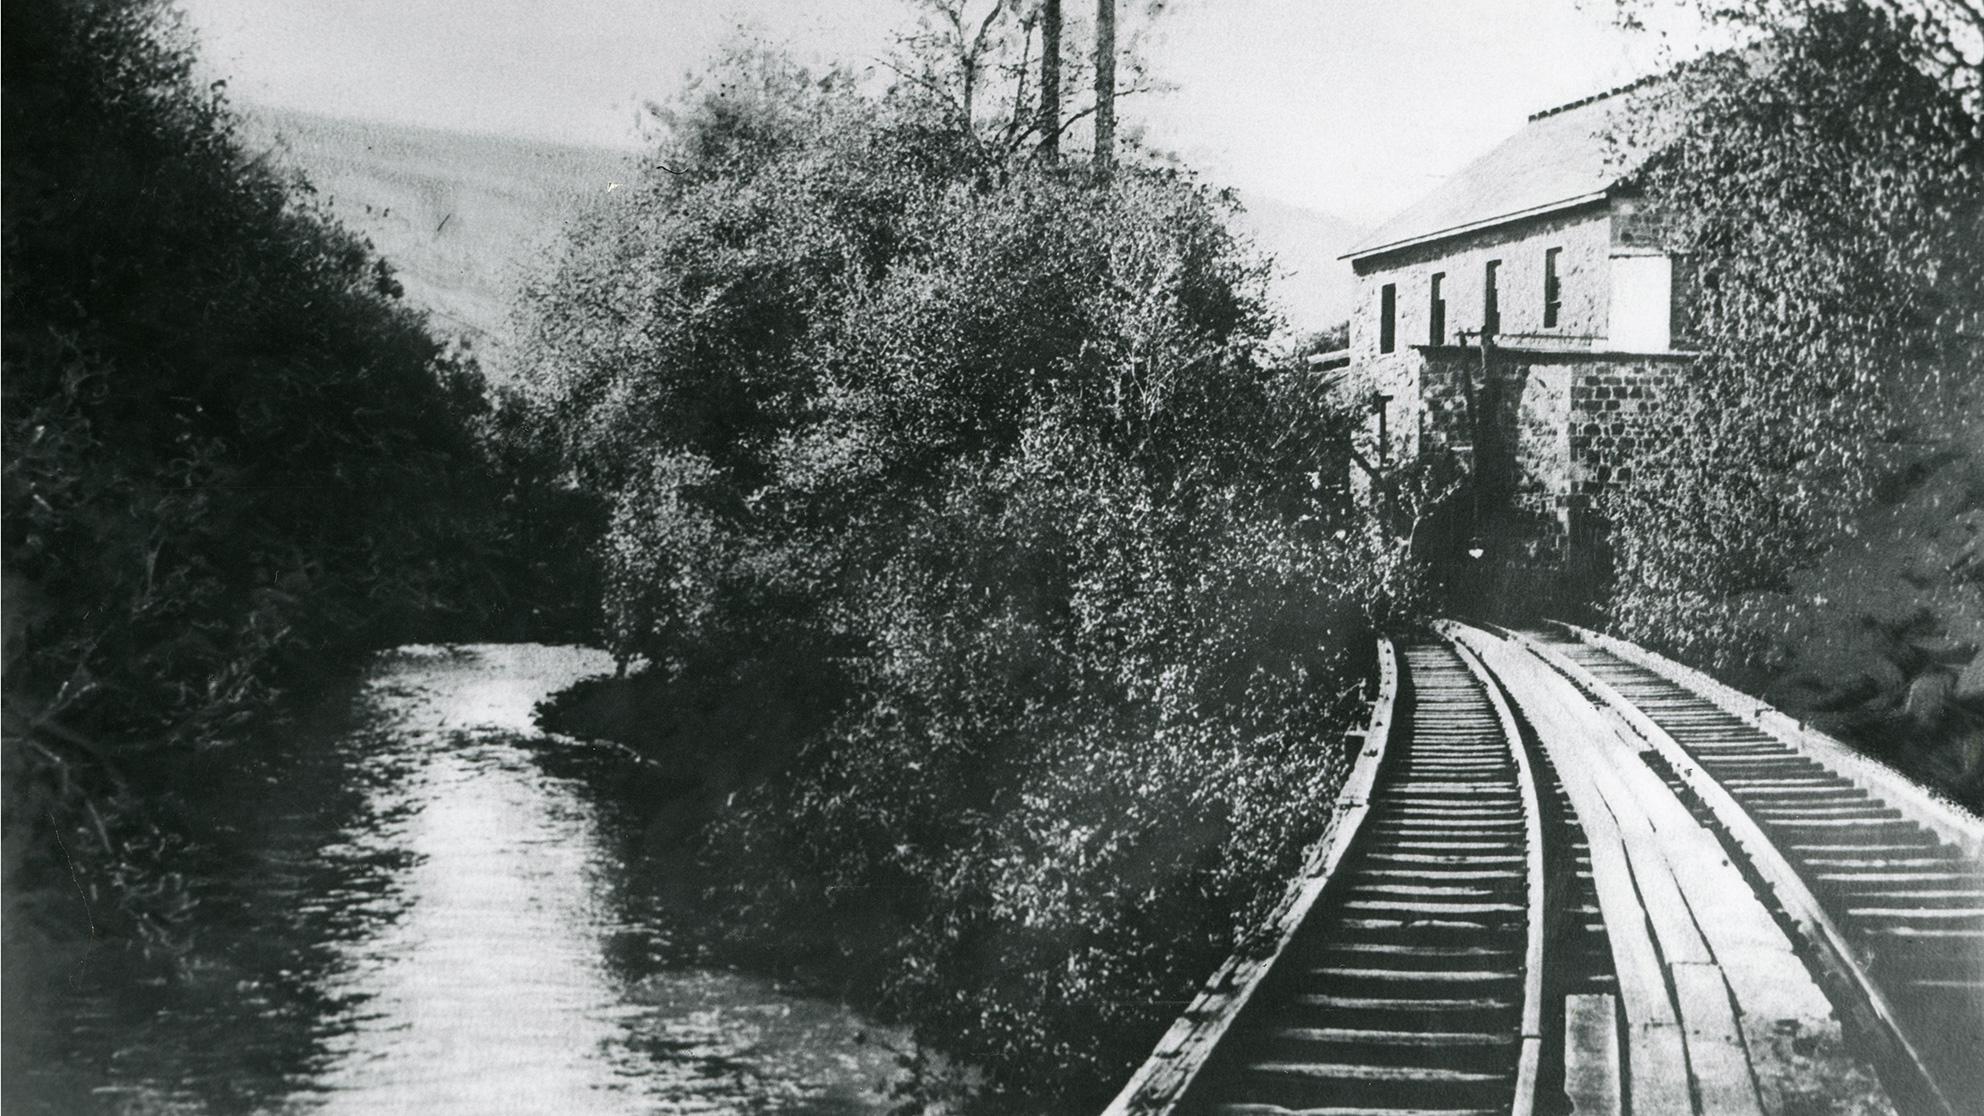 Archival black and white photo of train tracks along a river